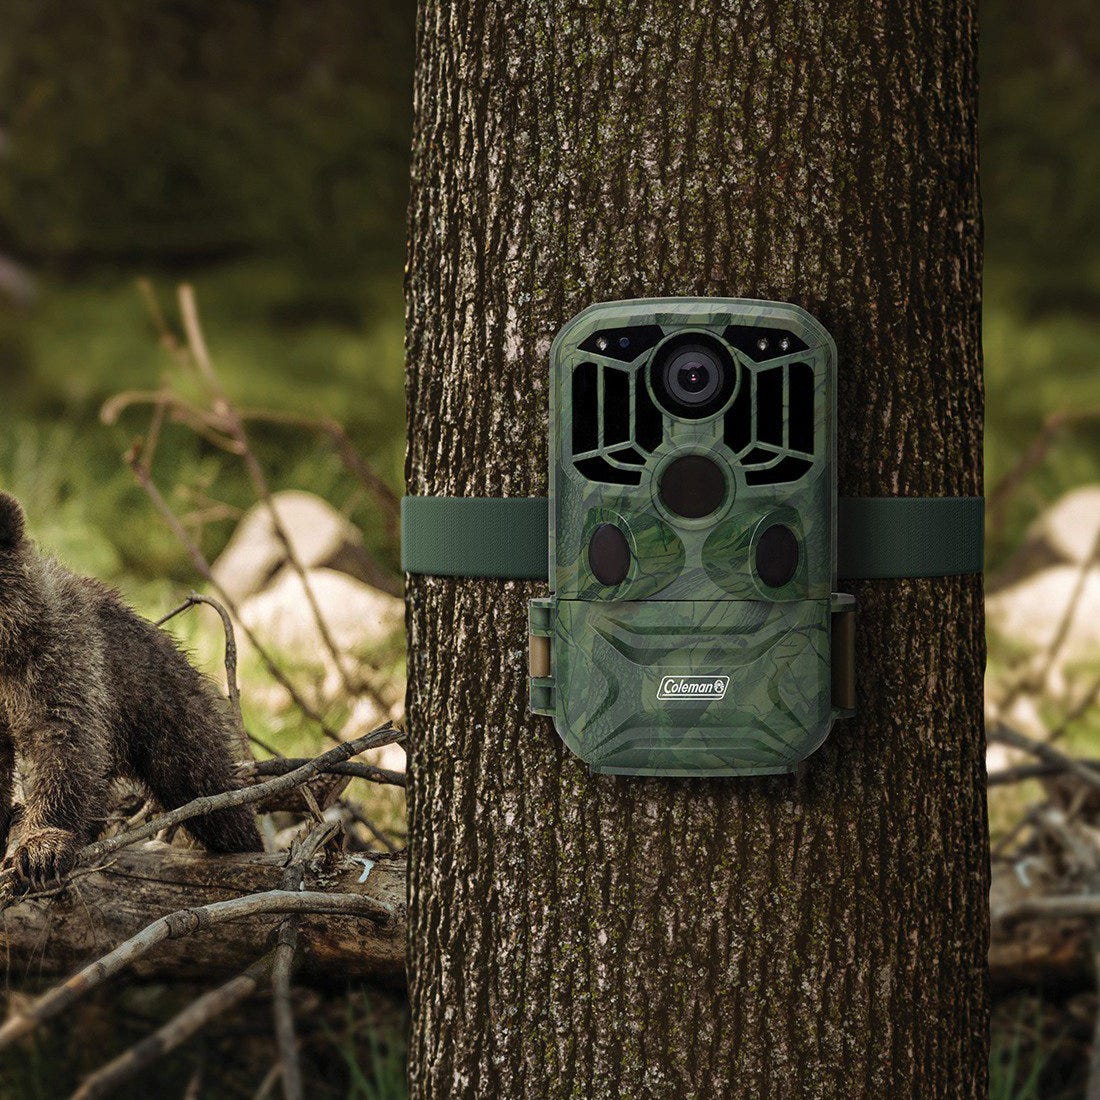 A trail camera mounted on a tree in a woodland setting with a raccoon in the background.